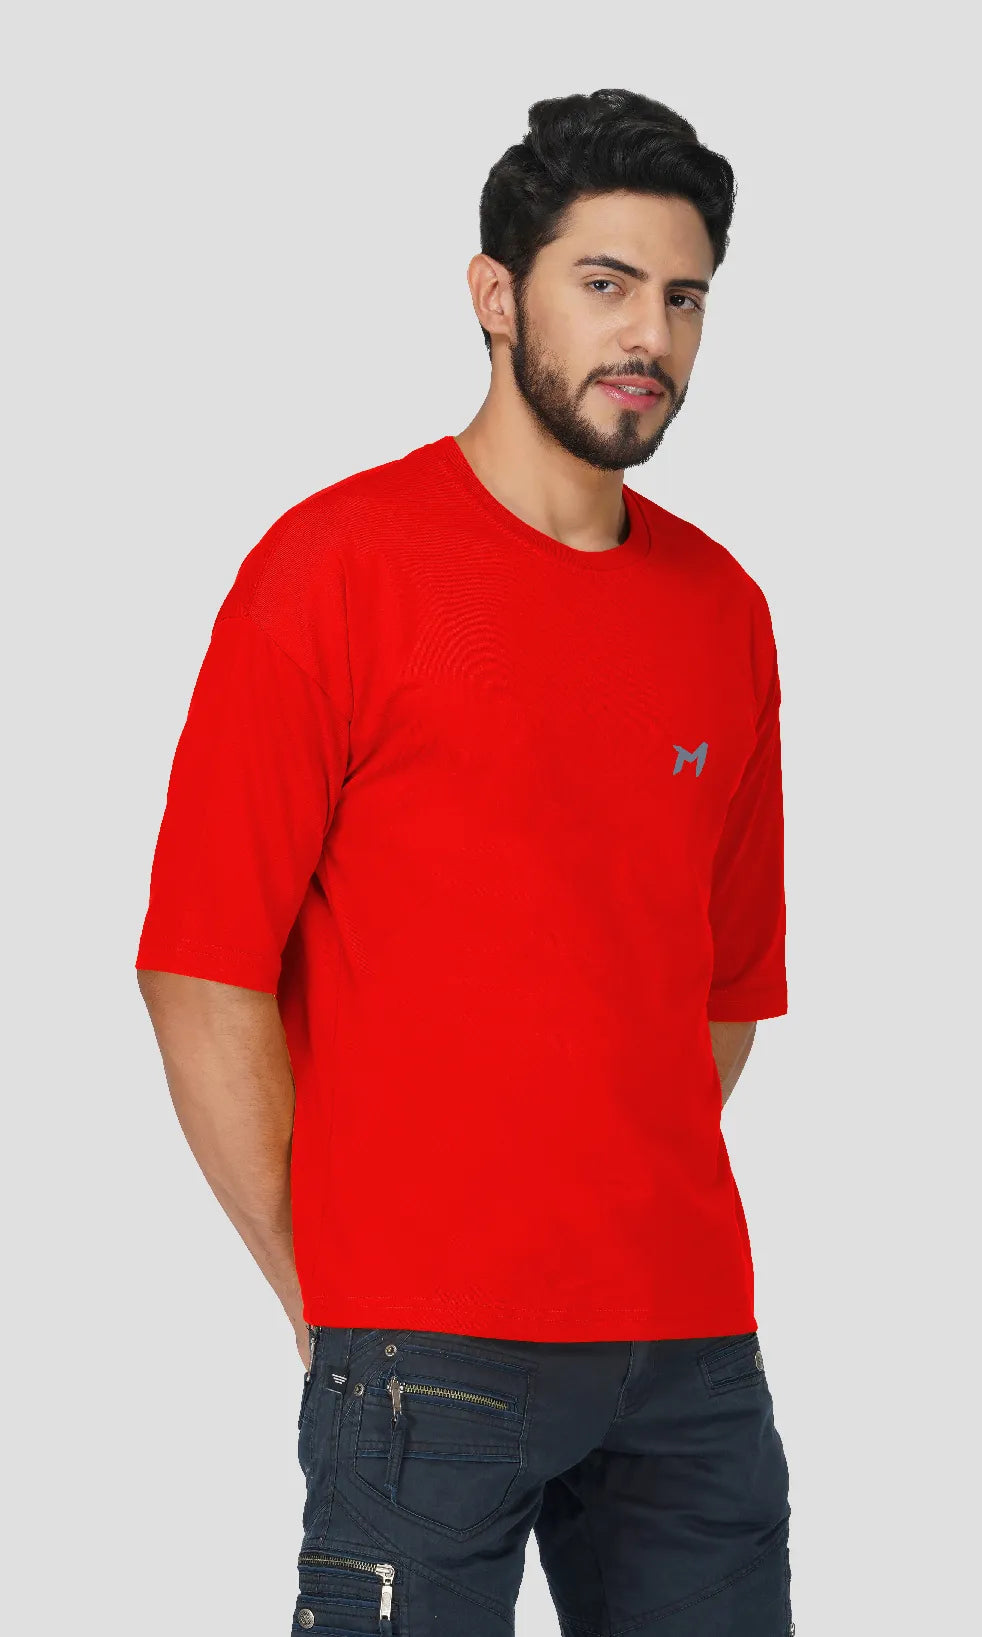 Mebadass Cotton Men's OverSized/Baggy Dropshoulder T-shirts - Red